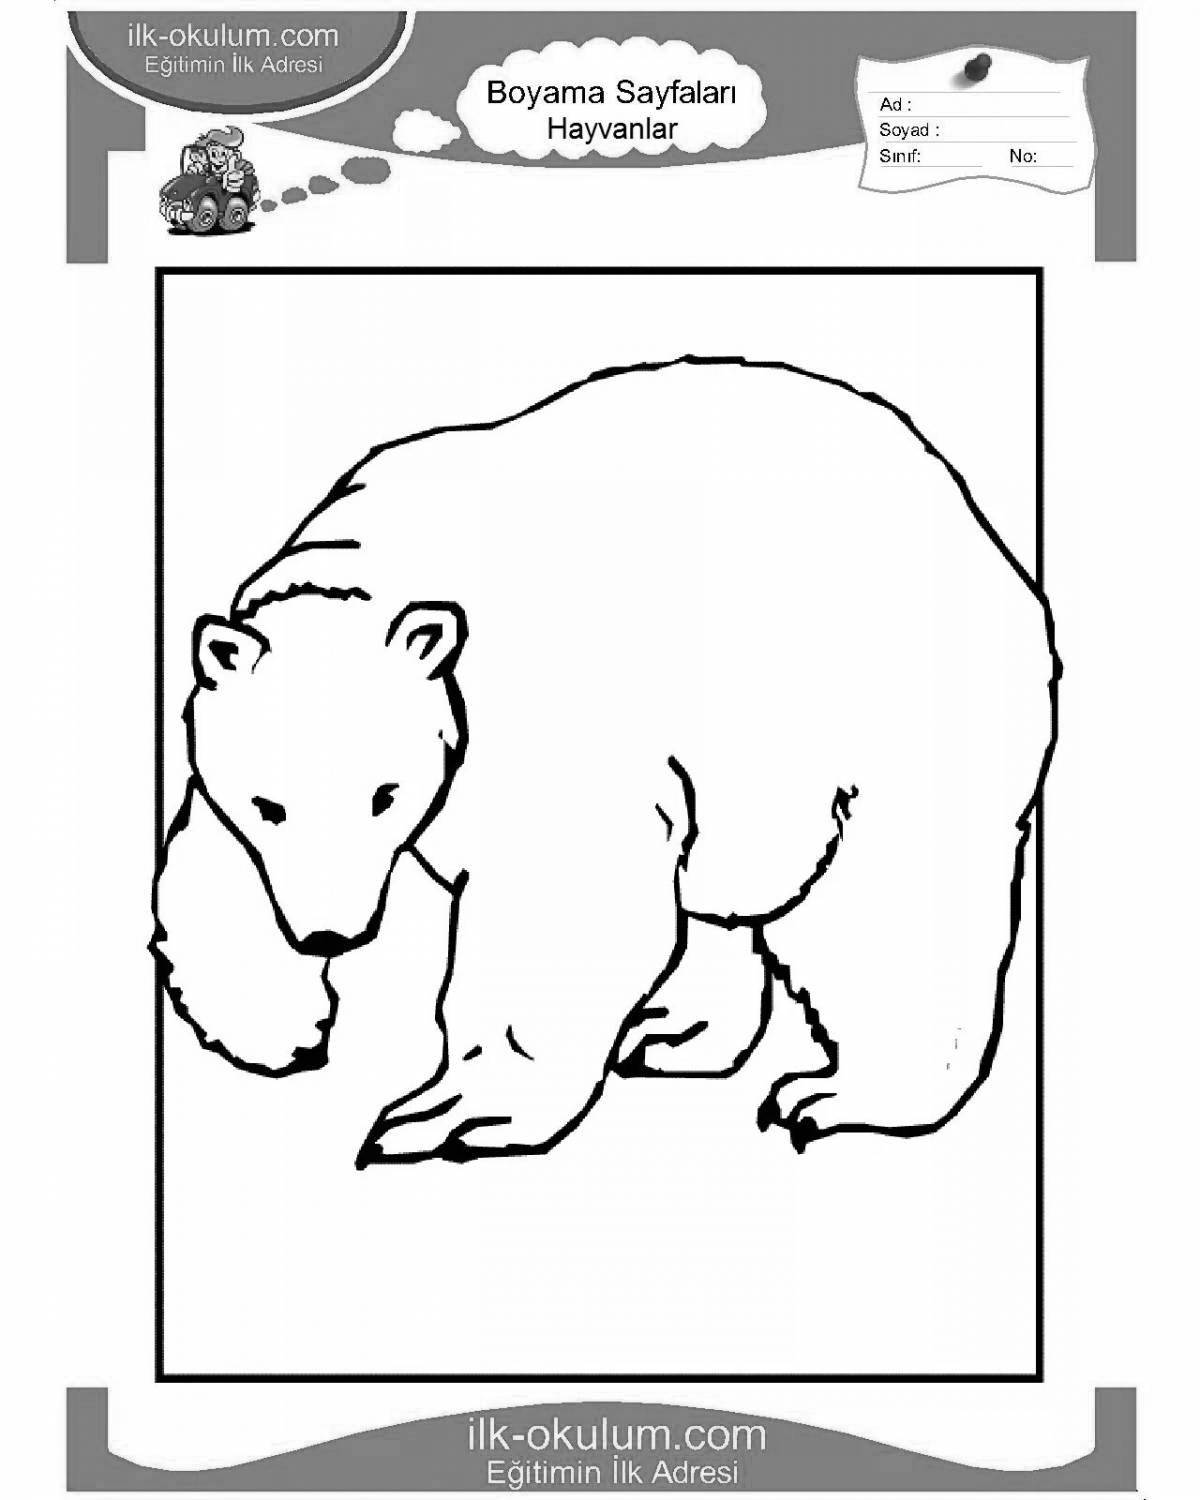 Colourful polar bear coloring book for children 5-6 years old